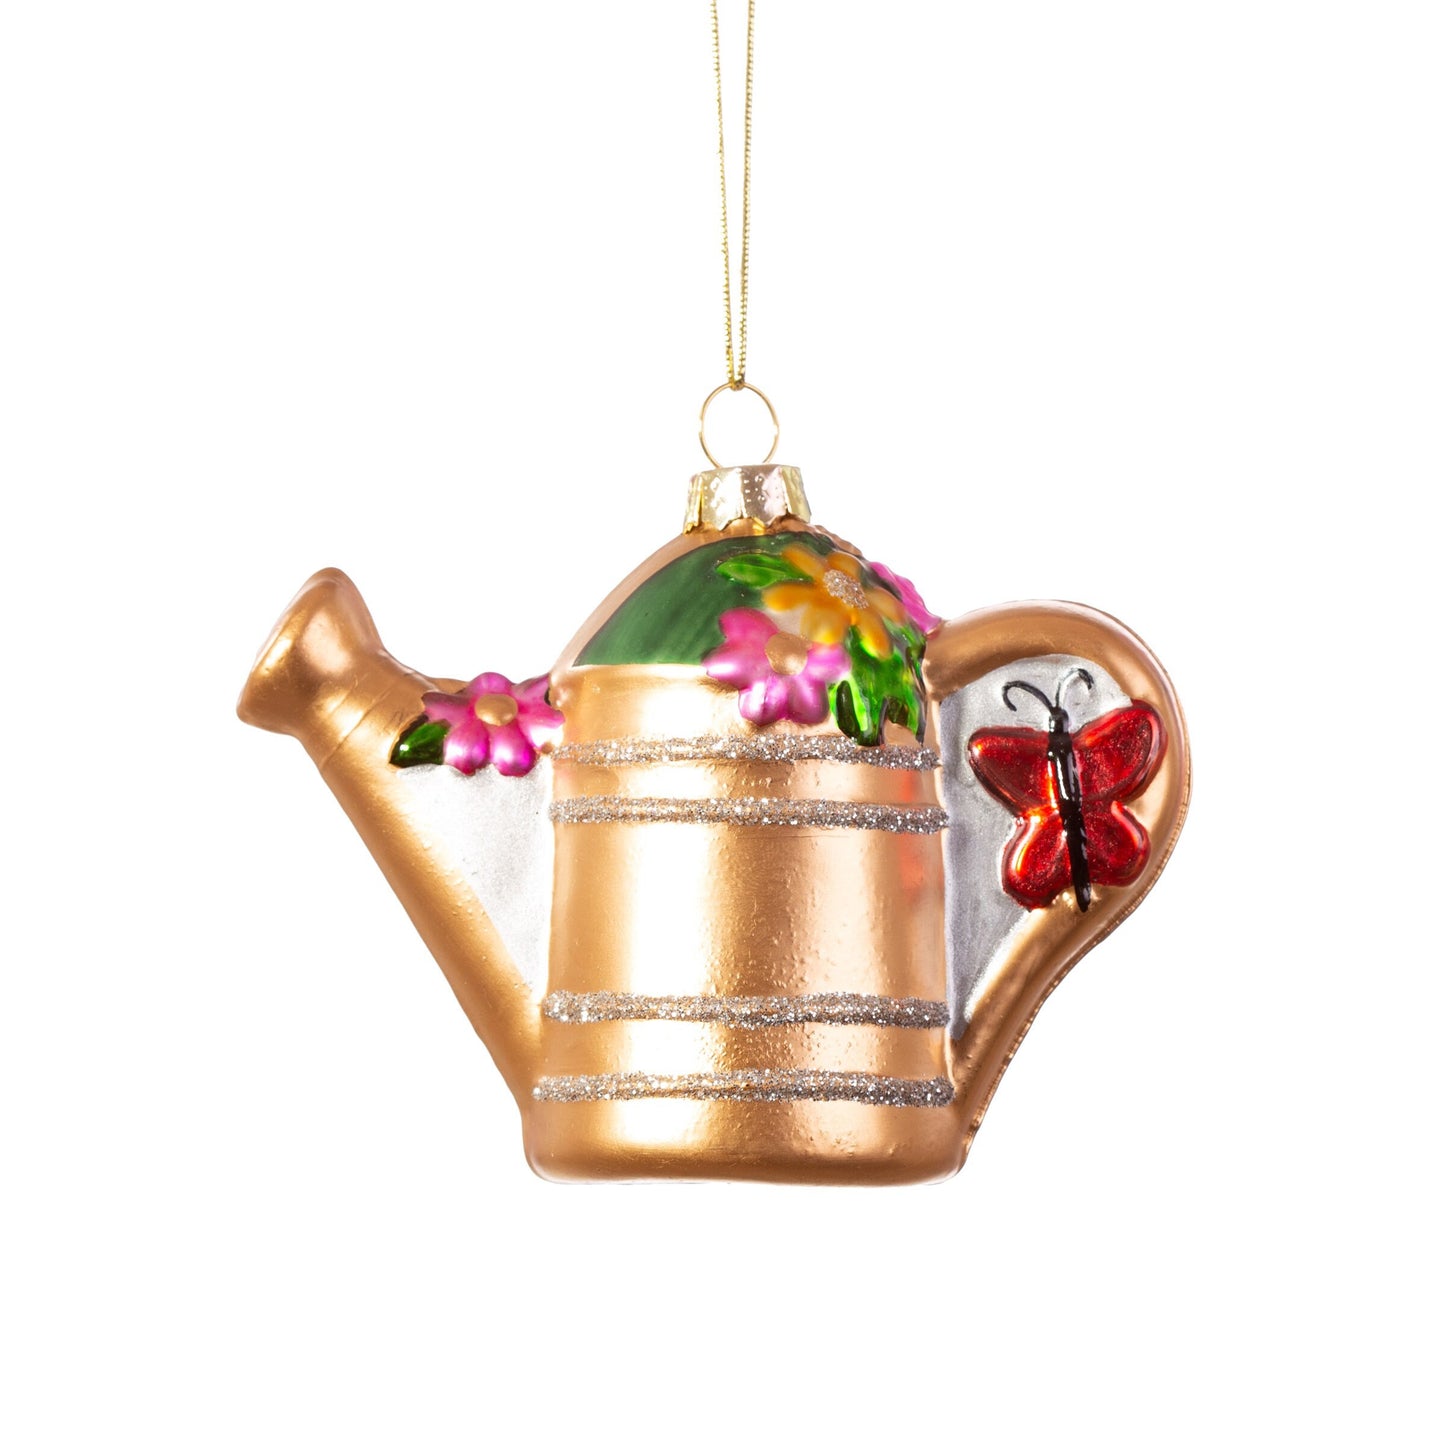 Hanging Watering Can Shaped Bauble Christmas Tree Decoration